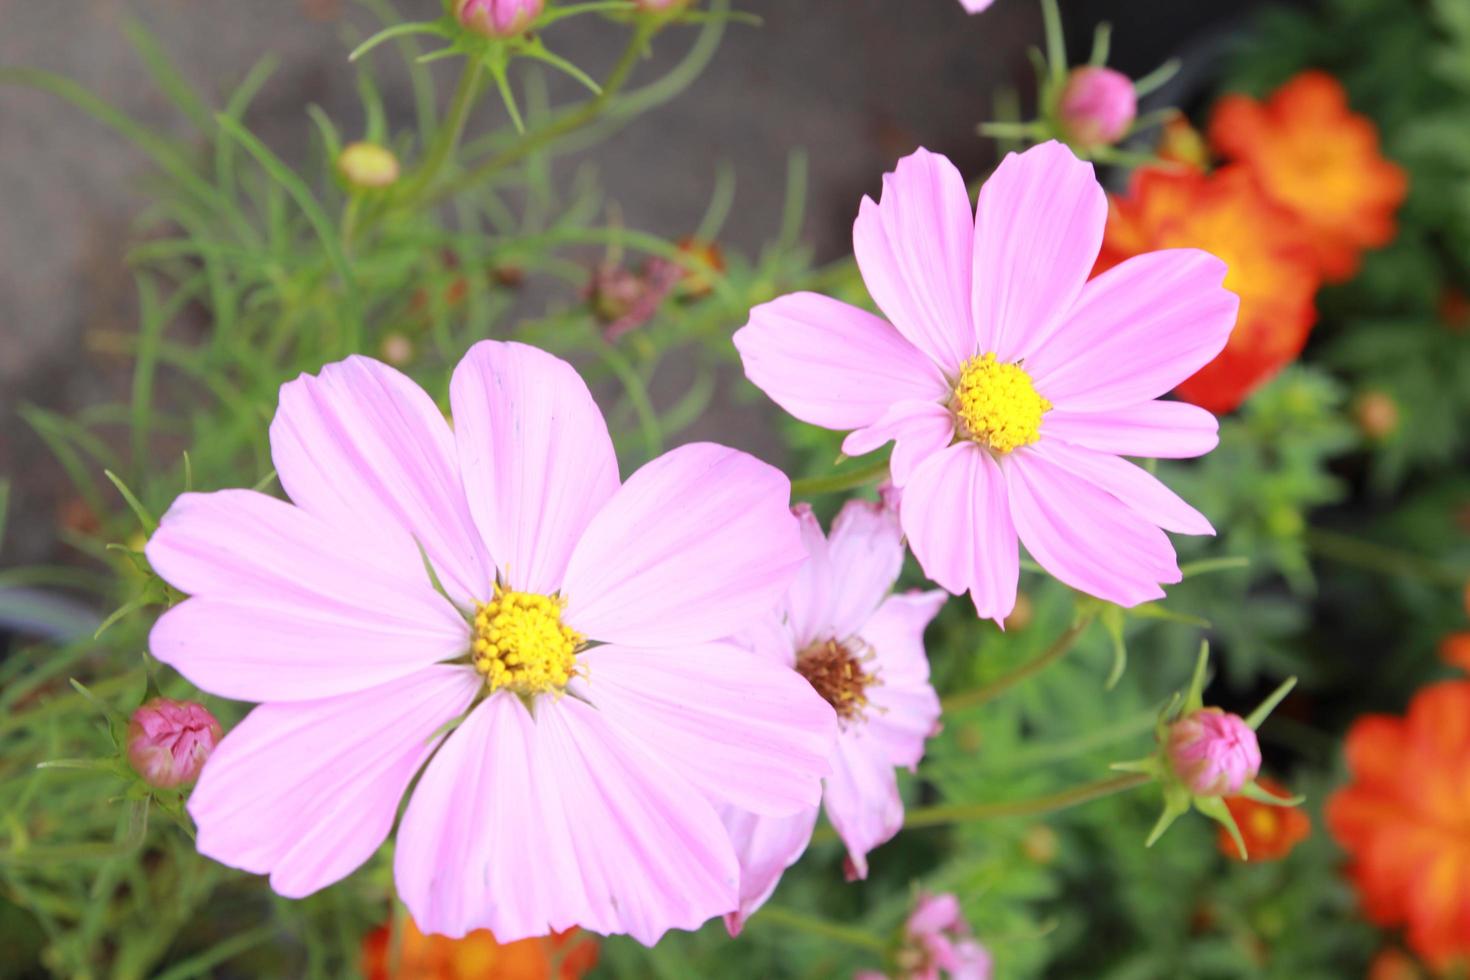 Cosmos are annual flowers with colorful photo